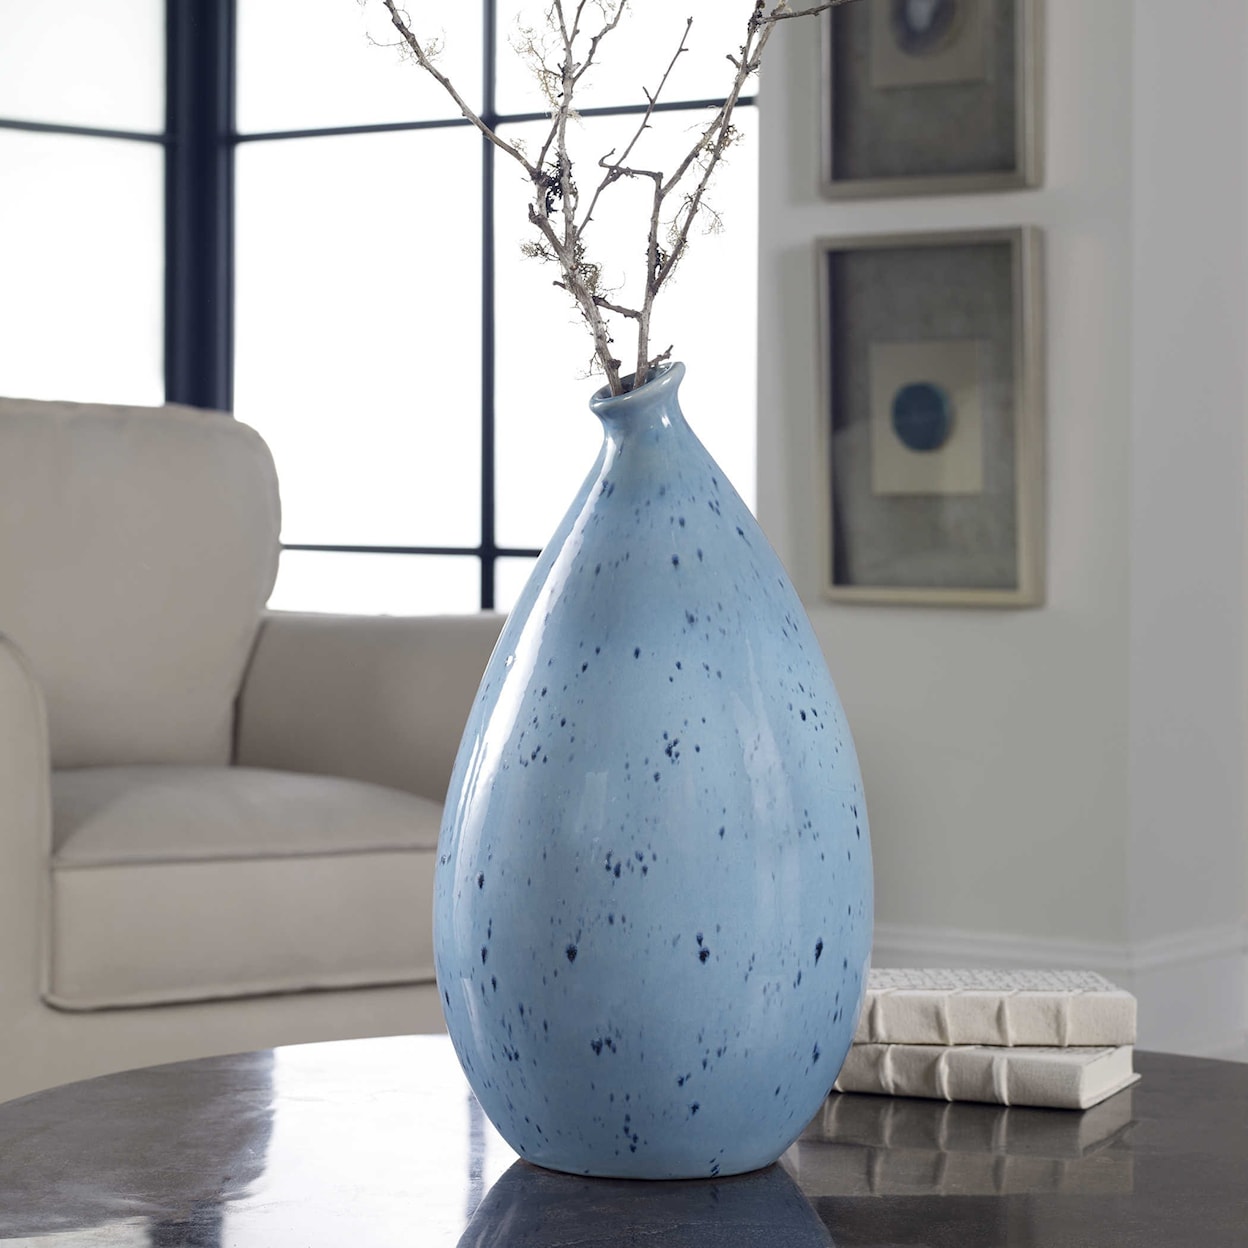 Uttermost Accessories - Vases and Urns Sky Blue Vase